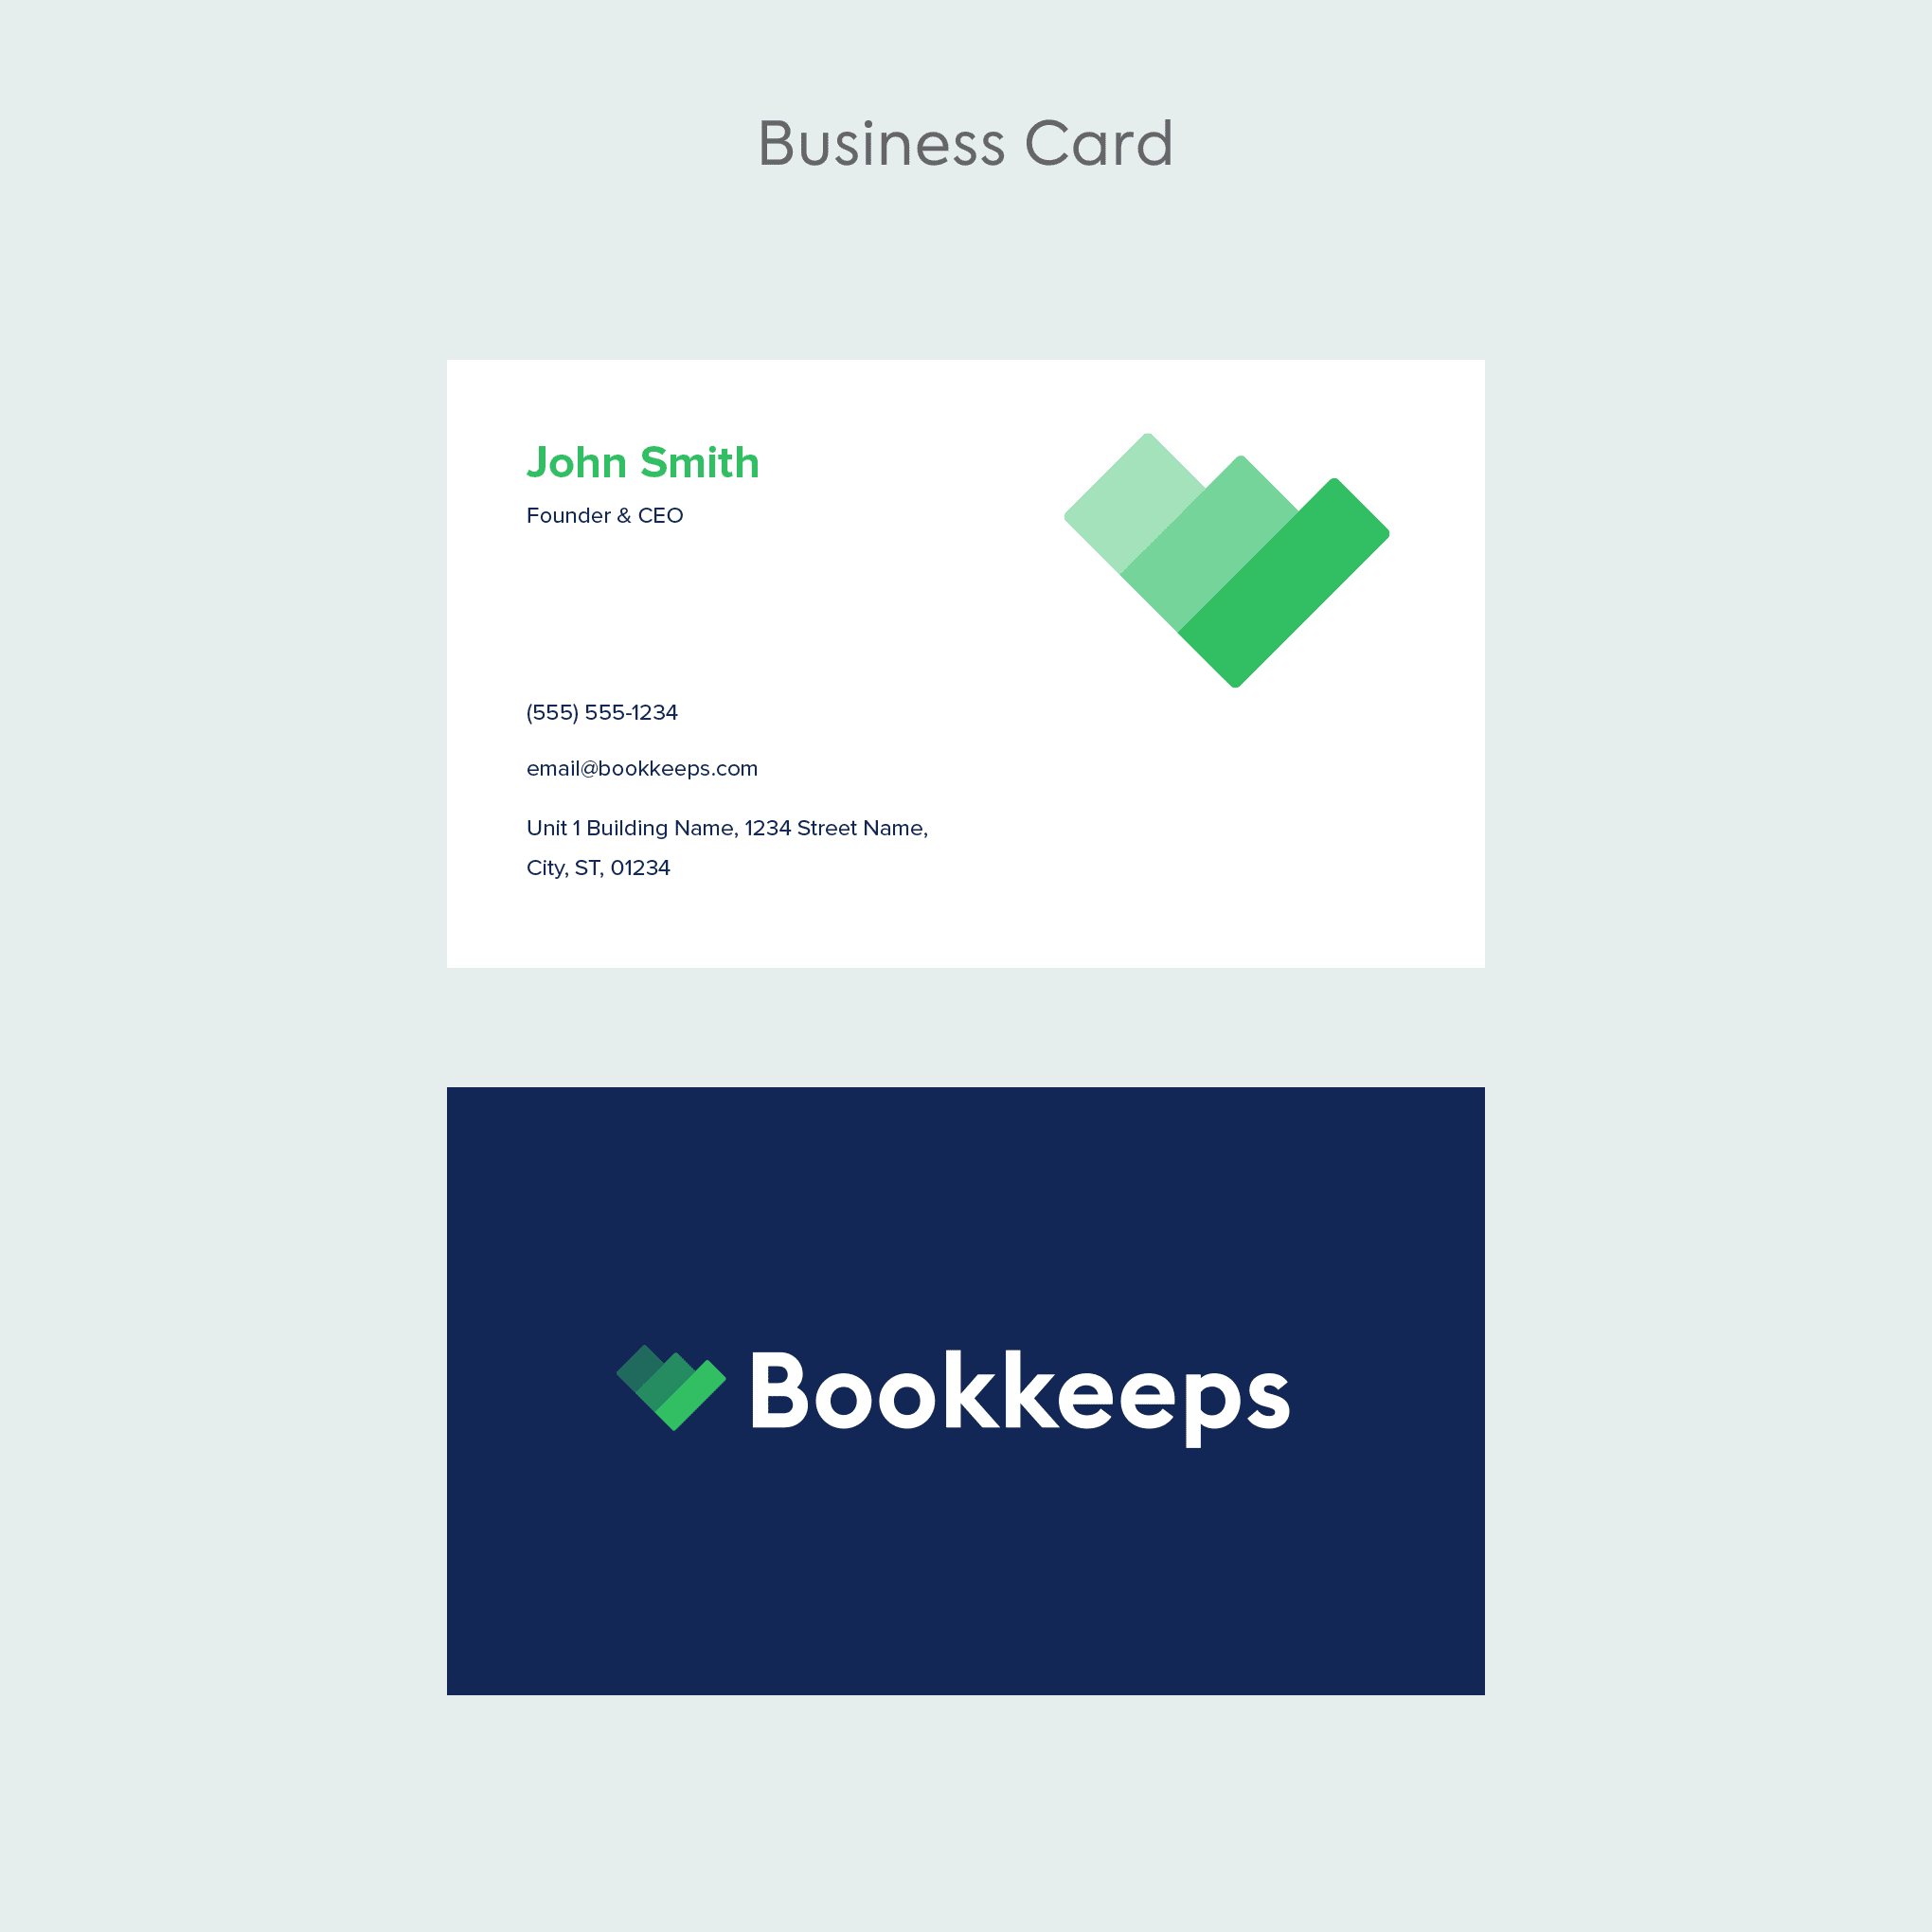 04 - Business Card Template (3)